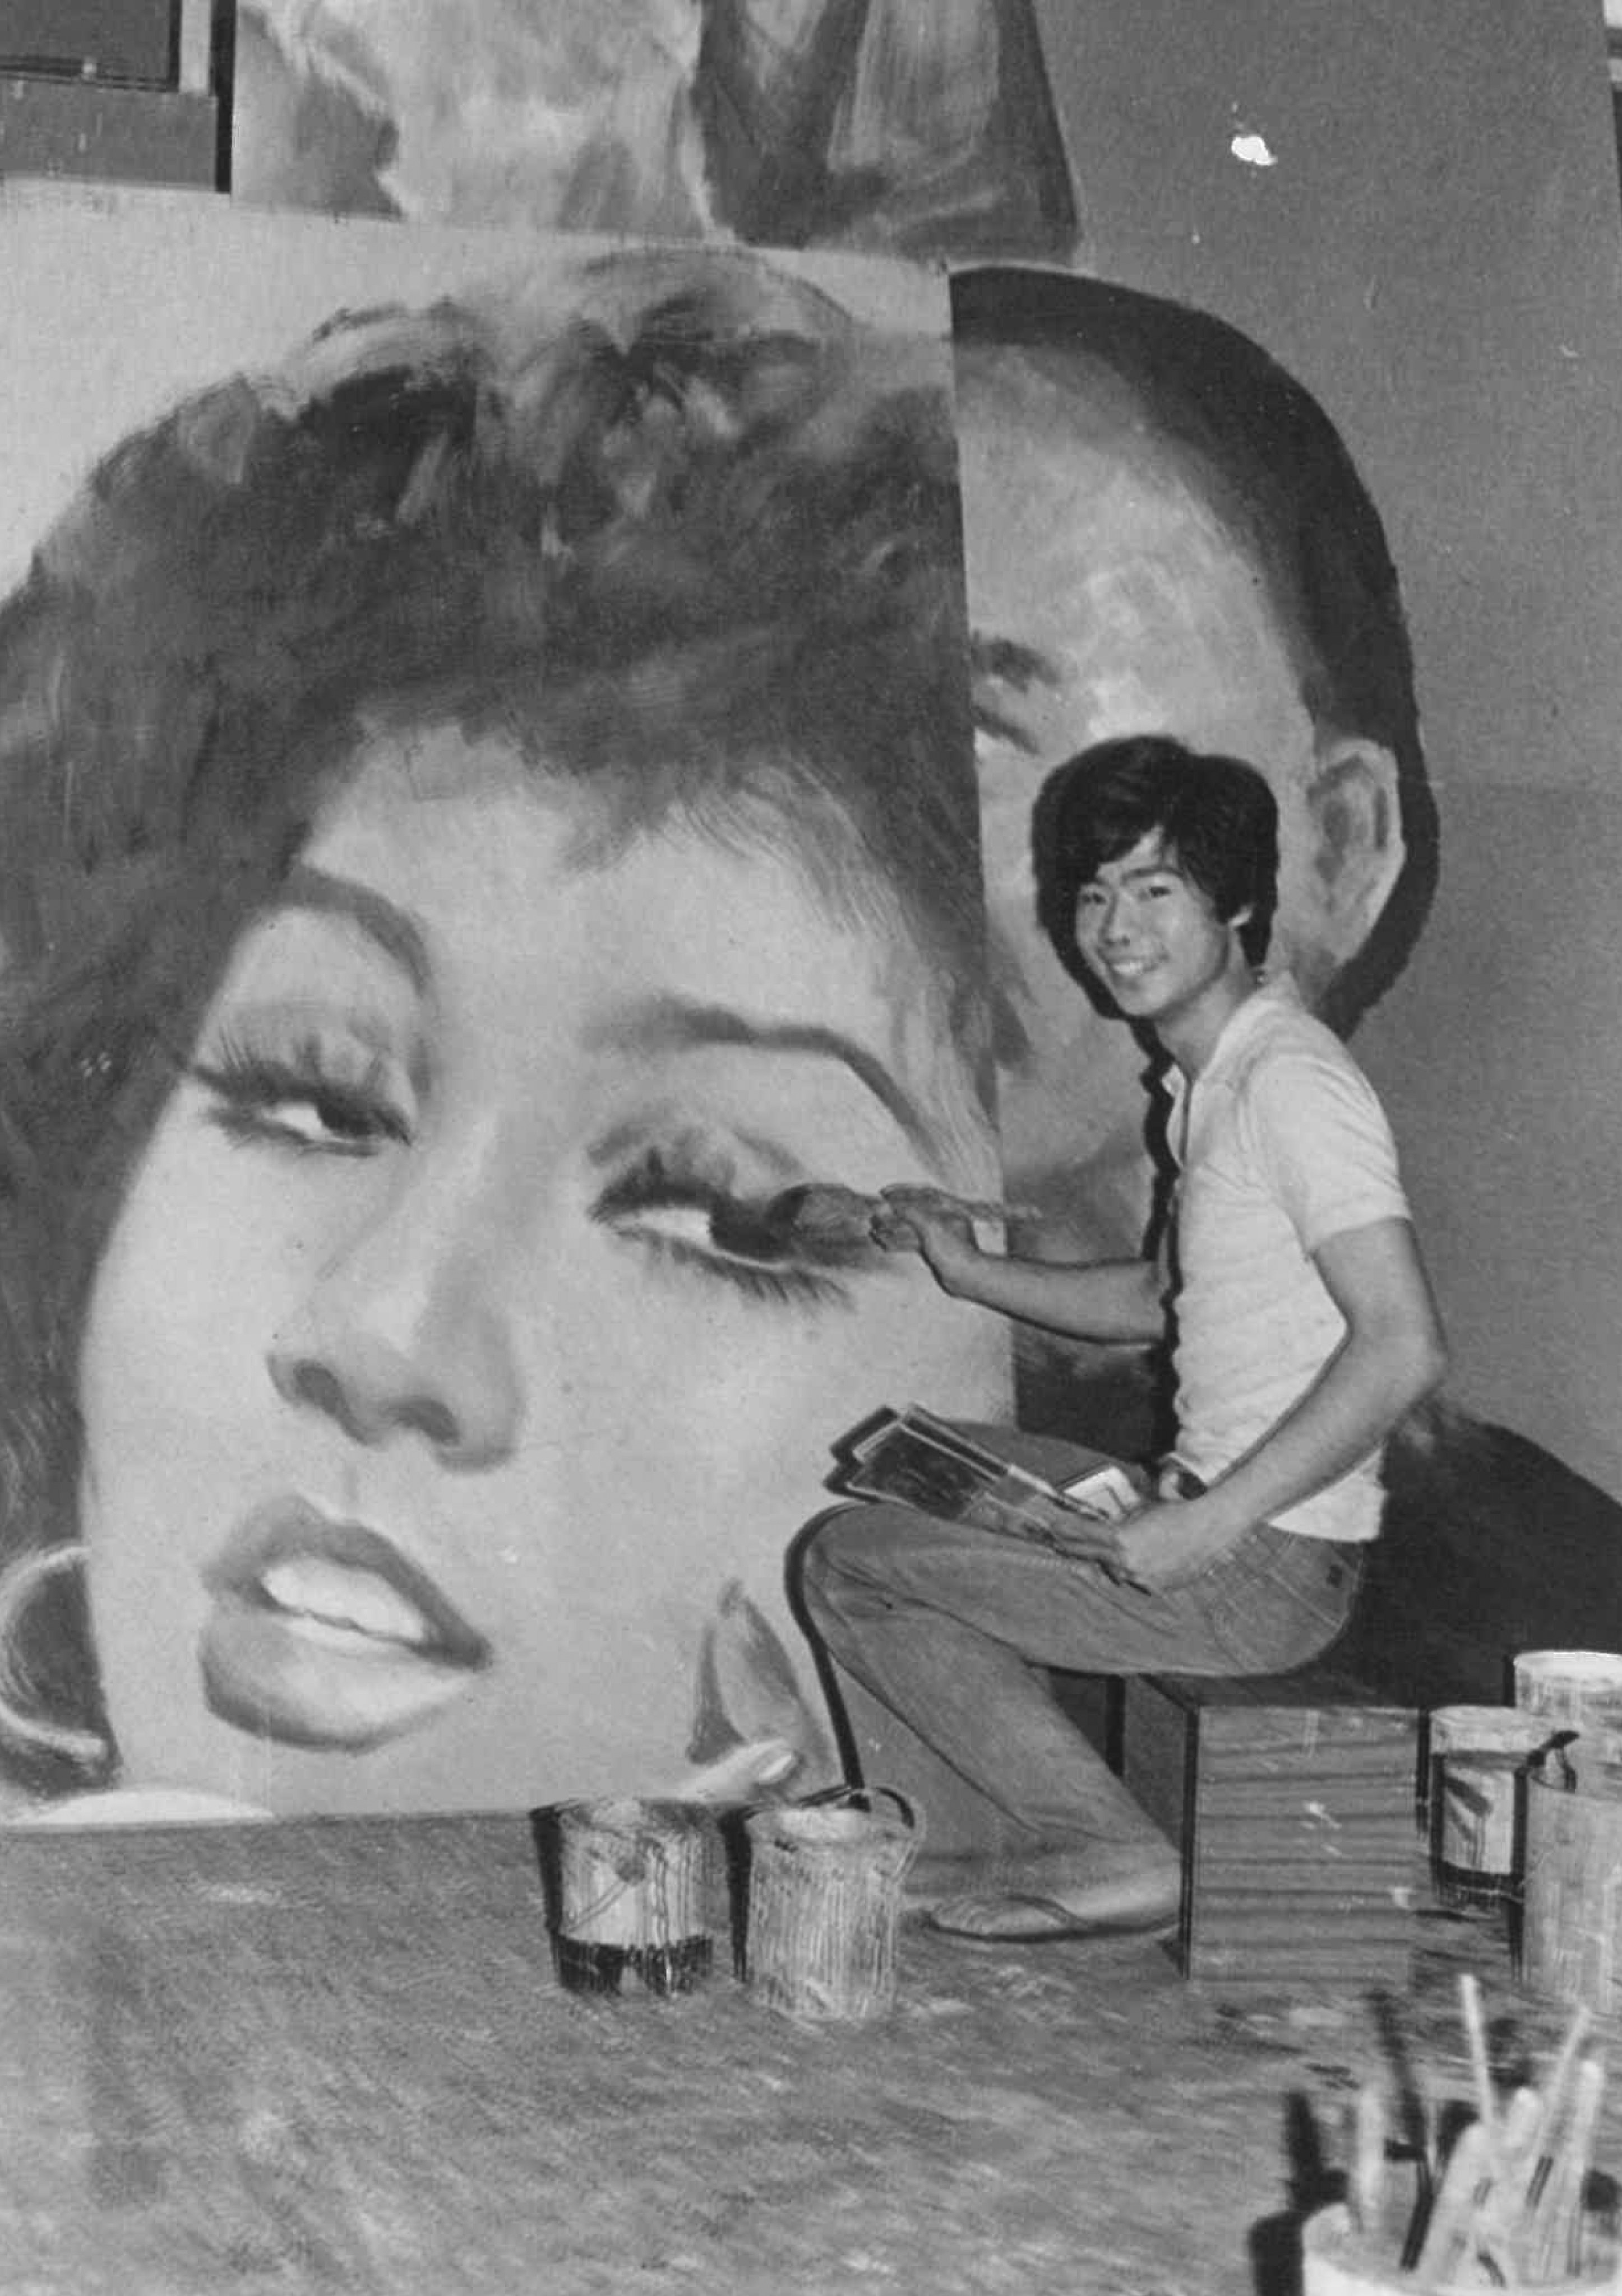 Jimmy Keung paints movie billboards for Peacock Advertising in 1972 in Hong Kong. Photo: Eaton HK / Theatre Ronin